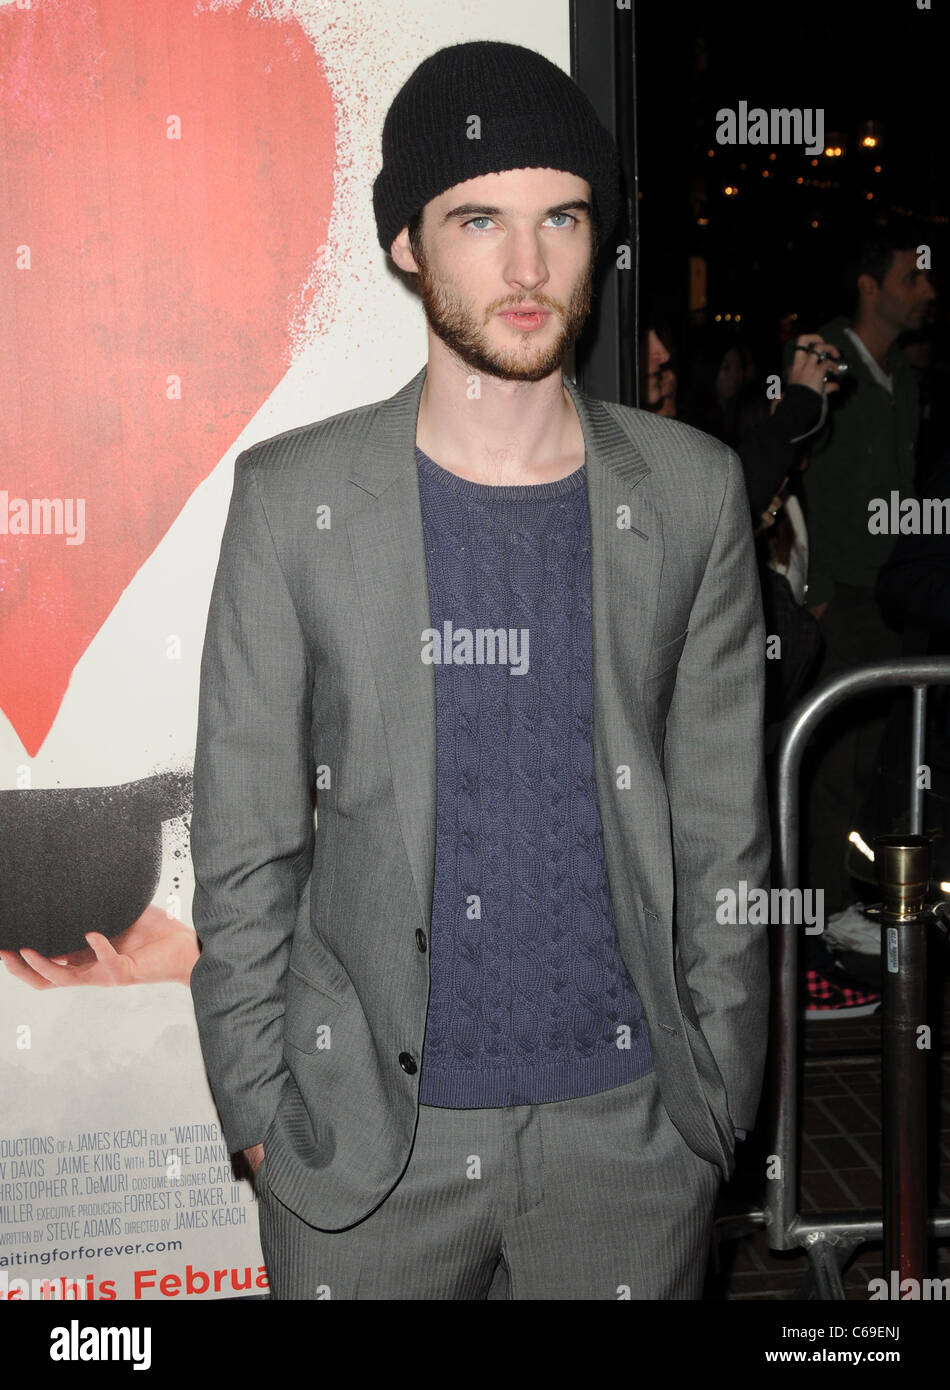 Tom Sturridge at arrivals for WAITING FOR FOREVER Premiere, The Grove, Los Angeles, CA February 1, 2011. Photo By: Dee Cercone/Everett Collection Stock Photo